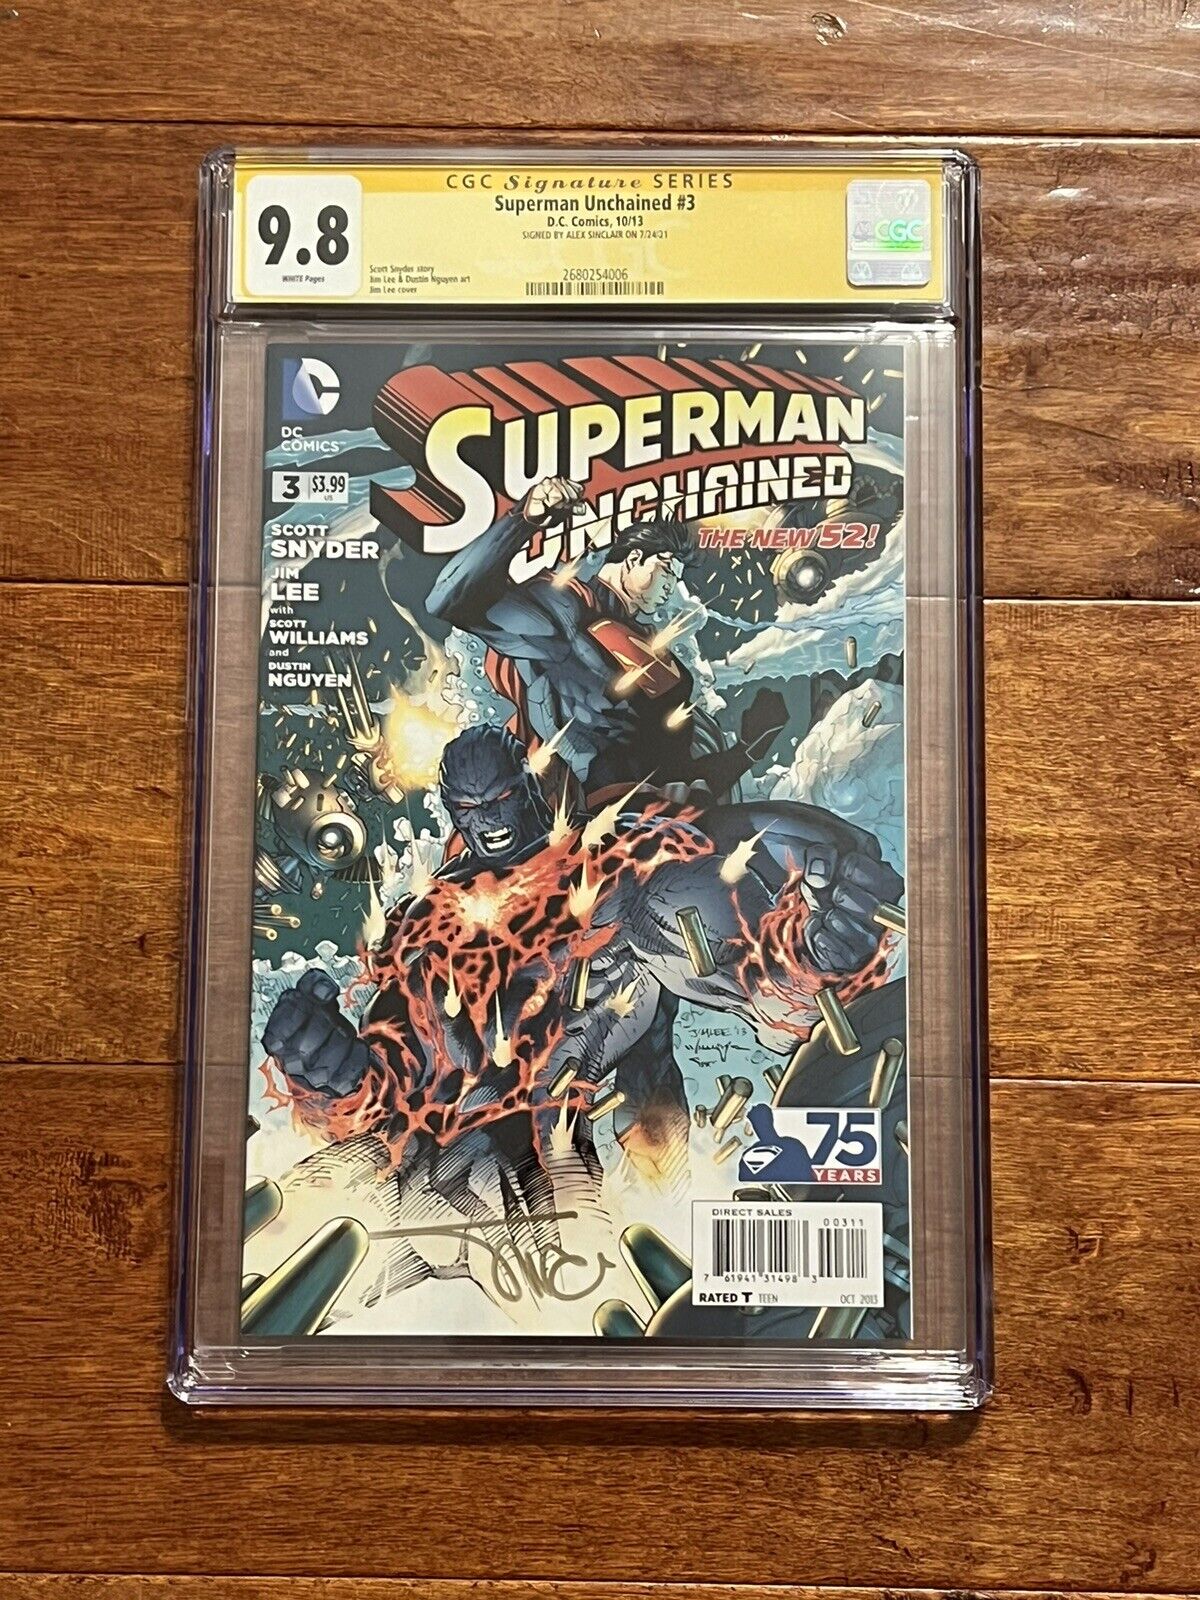 Superman Unchained #3 CGC 9.8 SS Signed by Alex Sinclair DC Comics Jim Lee